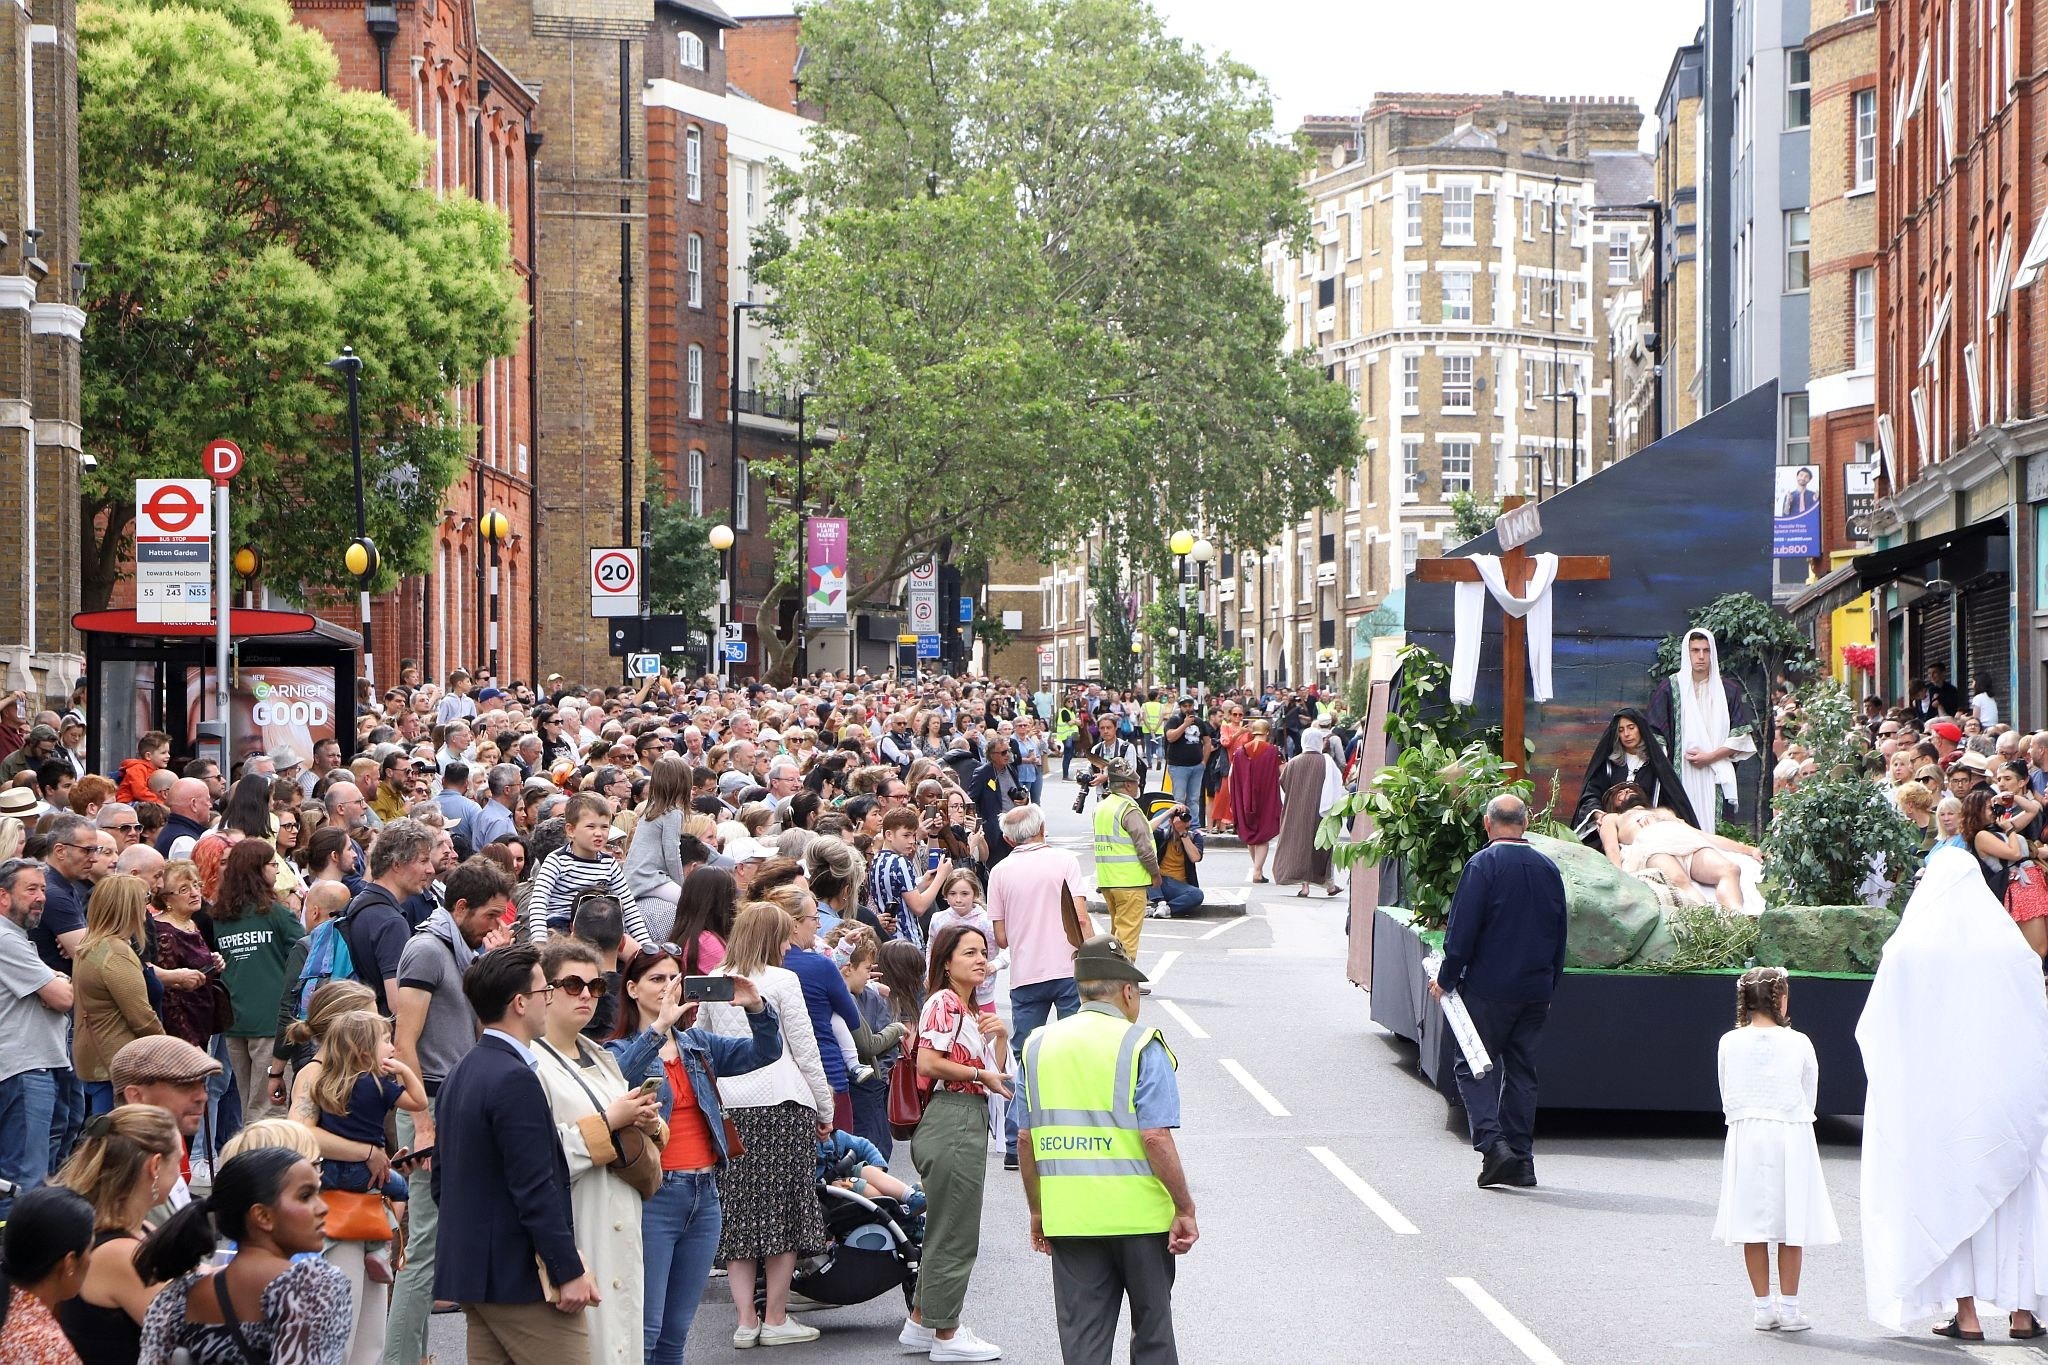 The 2023 annual Procession in Honour of Our Lady of Mount Carmel at St Peter's Italian Church in Clerkenwell, London. 16-Jul-2023.